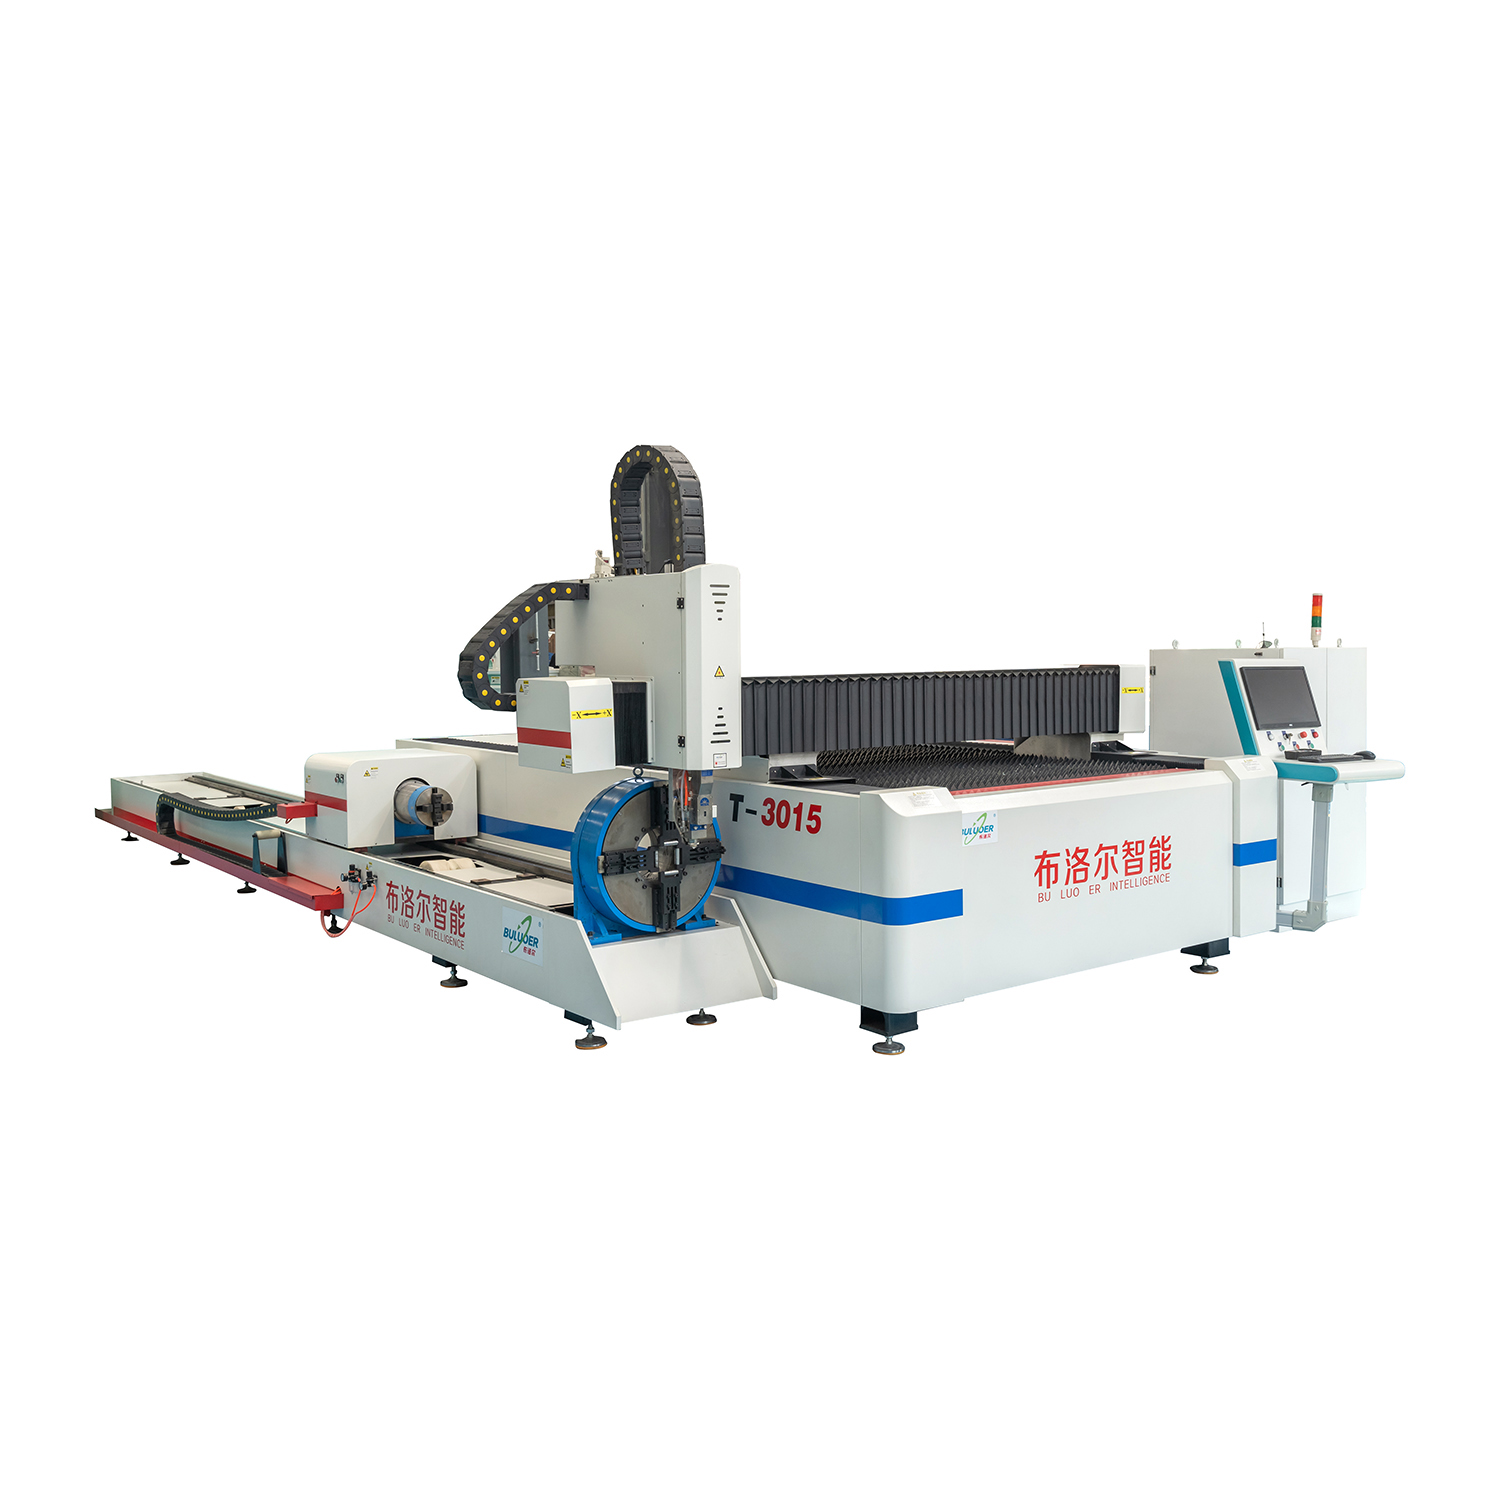 Factory-Direct T Series Pipe Sheet Fiber Laser Cutter for Precision Cuts